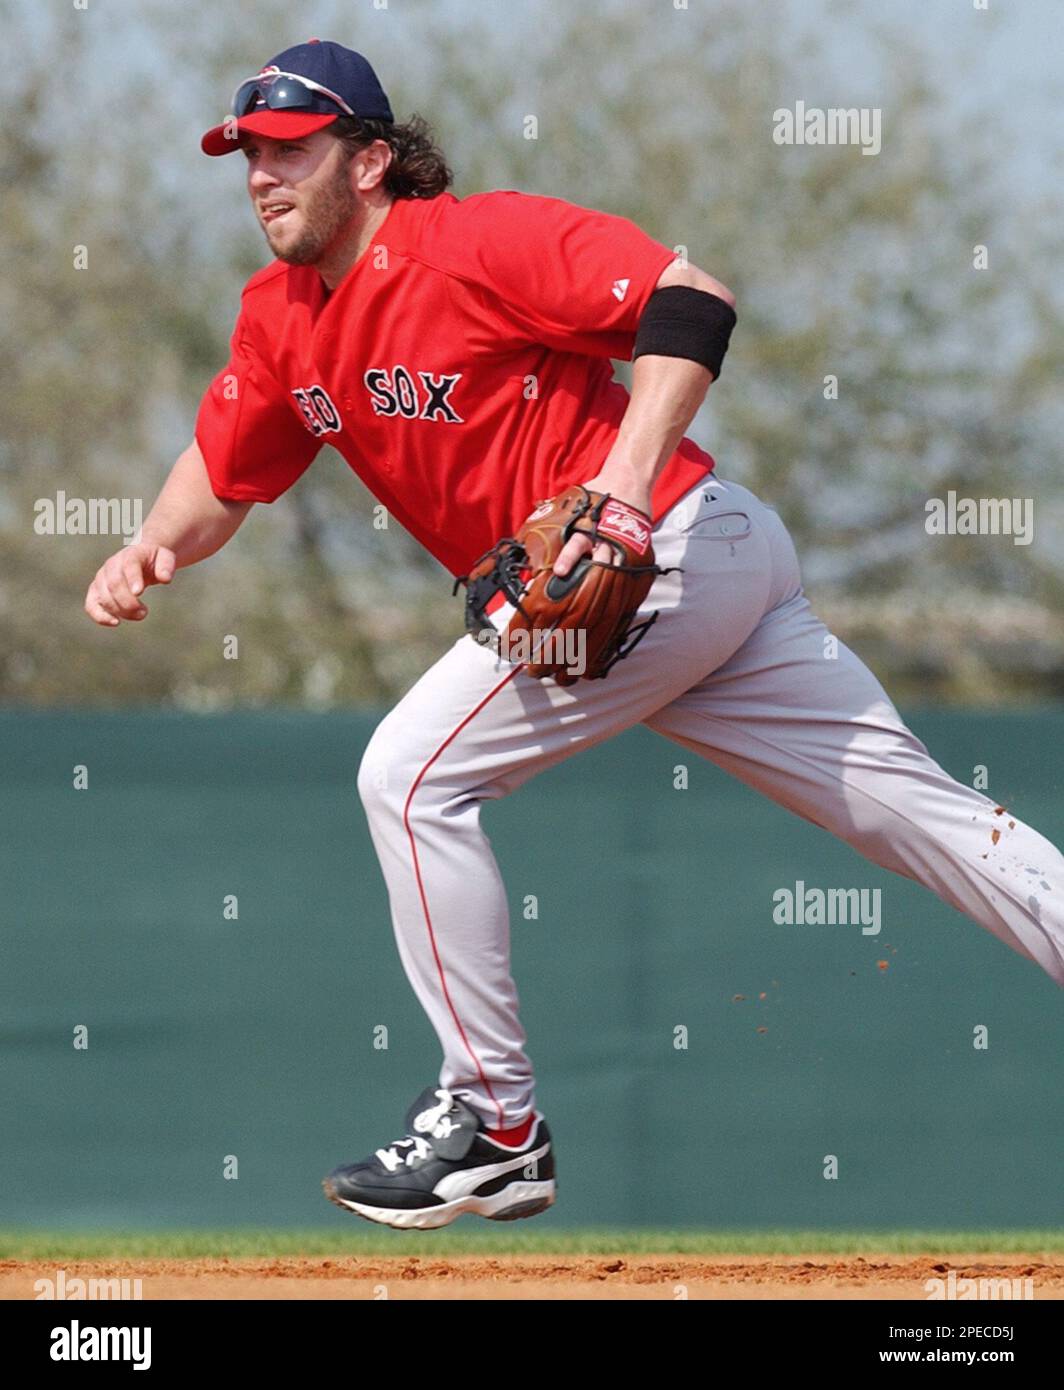 Boston Red Sox infielder Mark Bellhorn moves to cover second base,  Wednesday, Feb. 23, 2005, at spring training camp in Ft. Myers, Fla. (AP  Photo/Robert F. Bukaty Stock Photo - Alamy